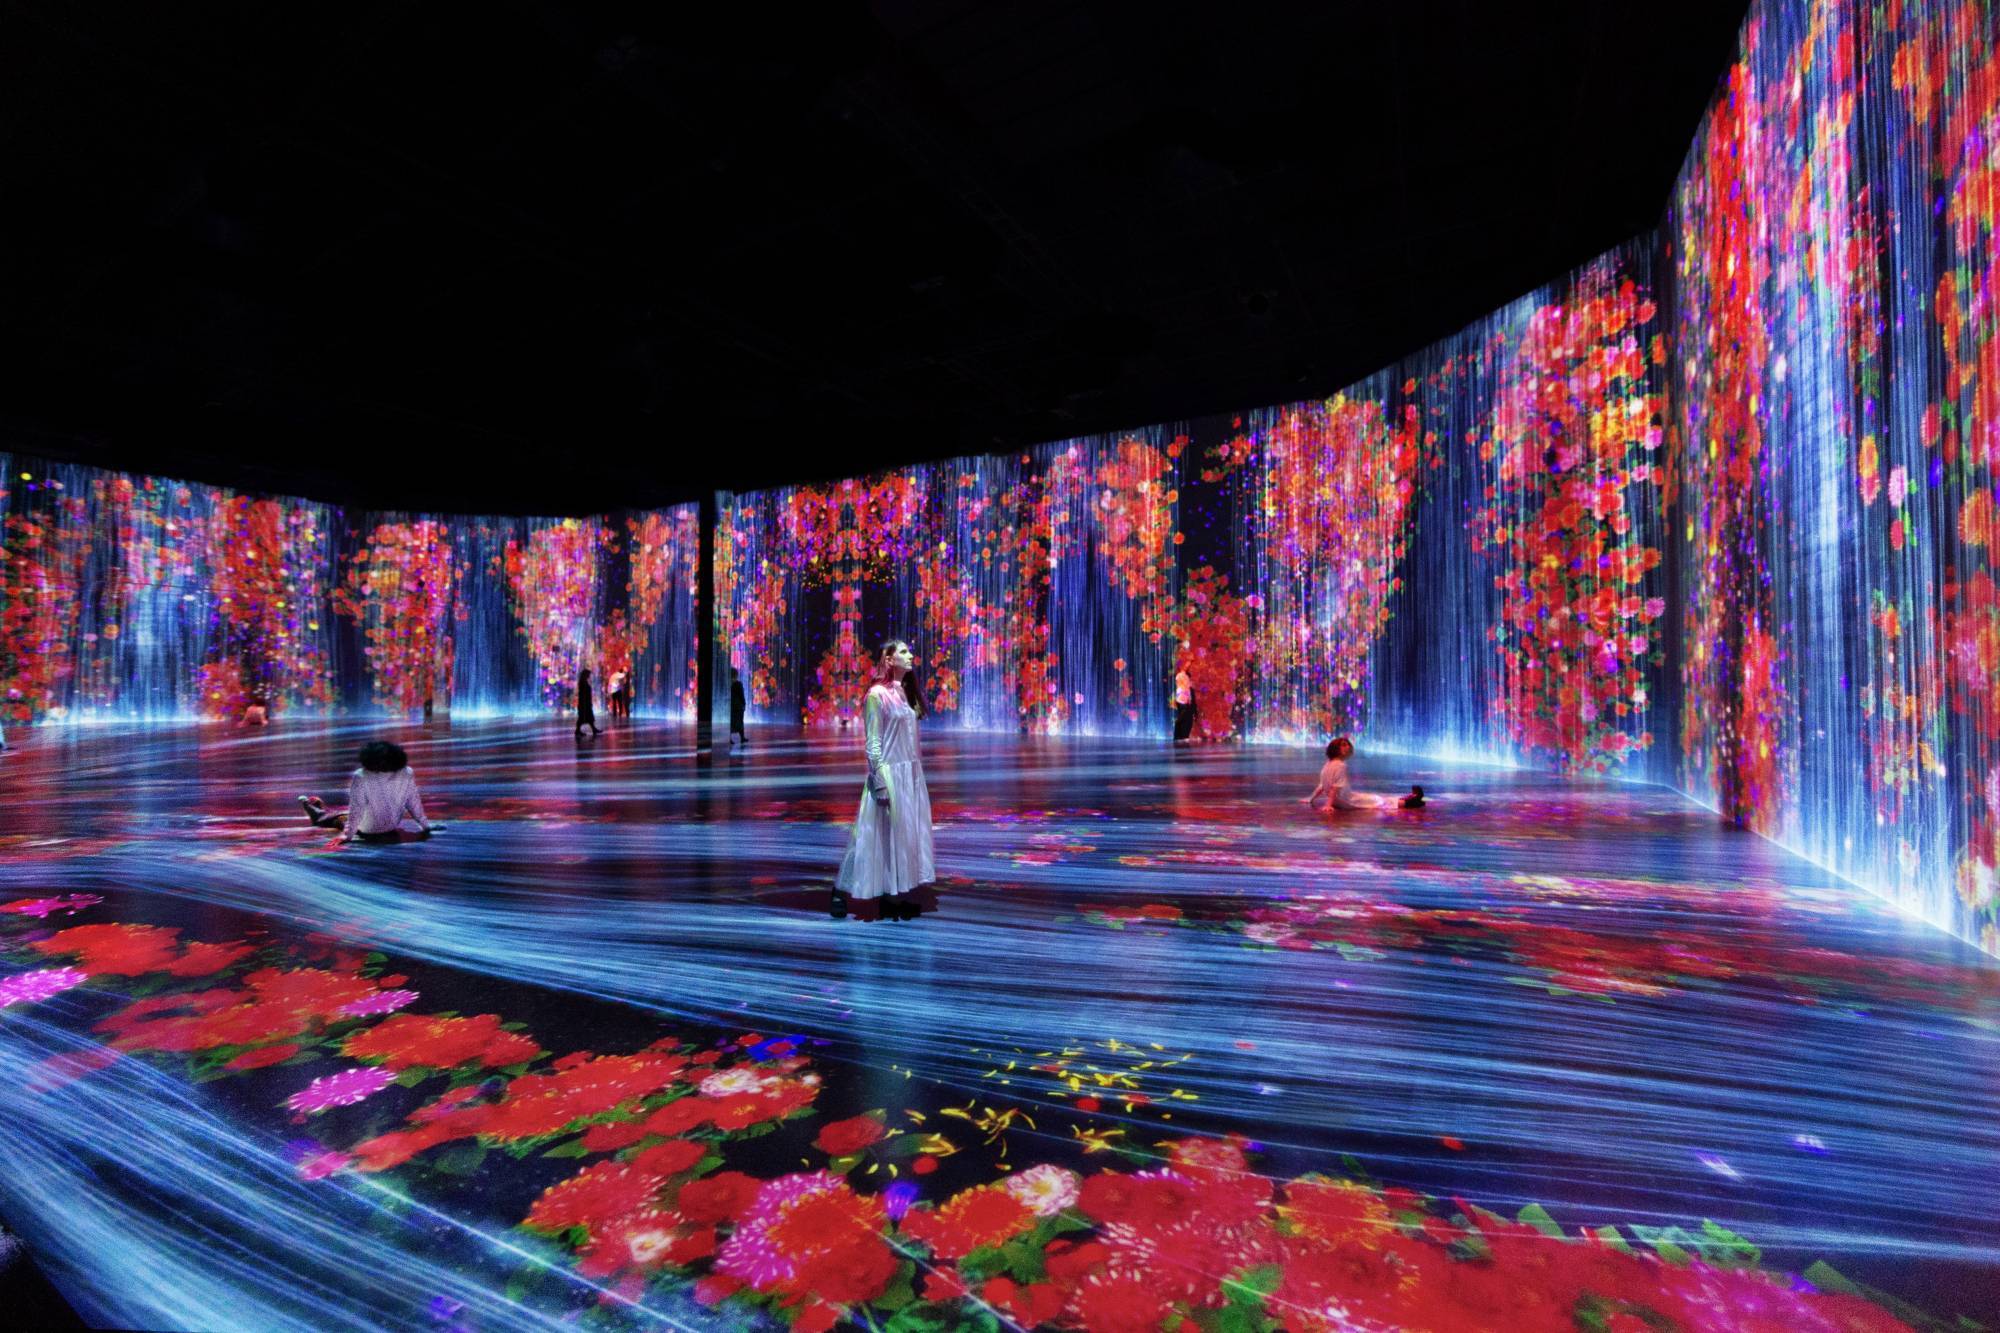 The Wick - teamLab, Flowers and People, Cannot be Controlled but Live Together - Transcending Boundaries, A Whole Year per Hour 2017. Sound: Hideaki Takahashi. Installation view of Every Wall is a Door, Superblue Miami, 2021.   teamLab, Courtesy Pace Gallery